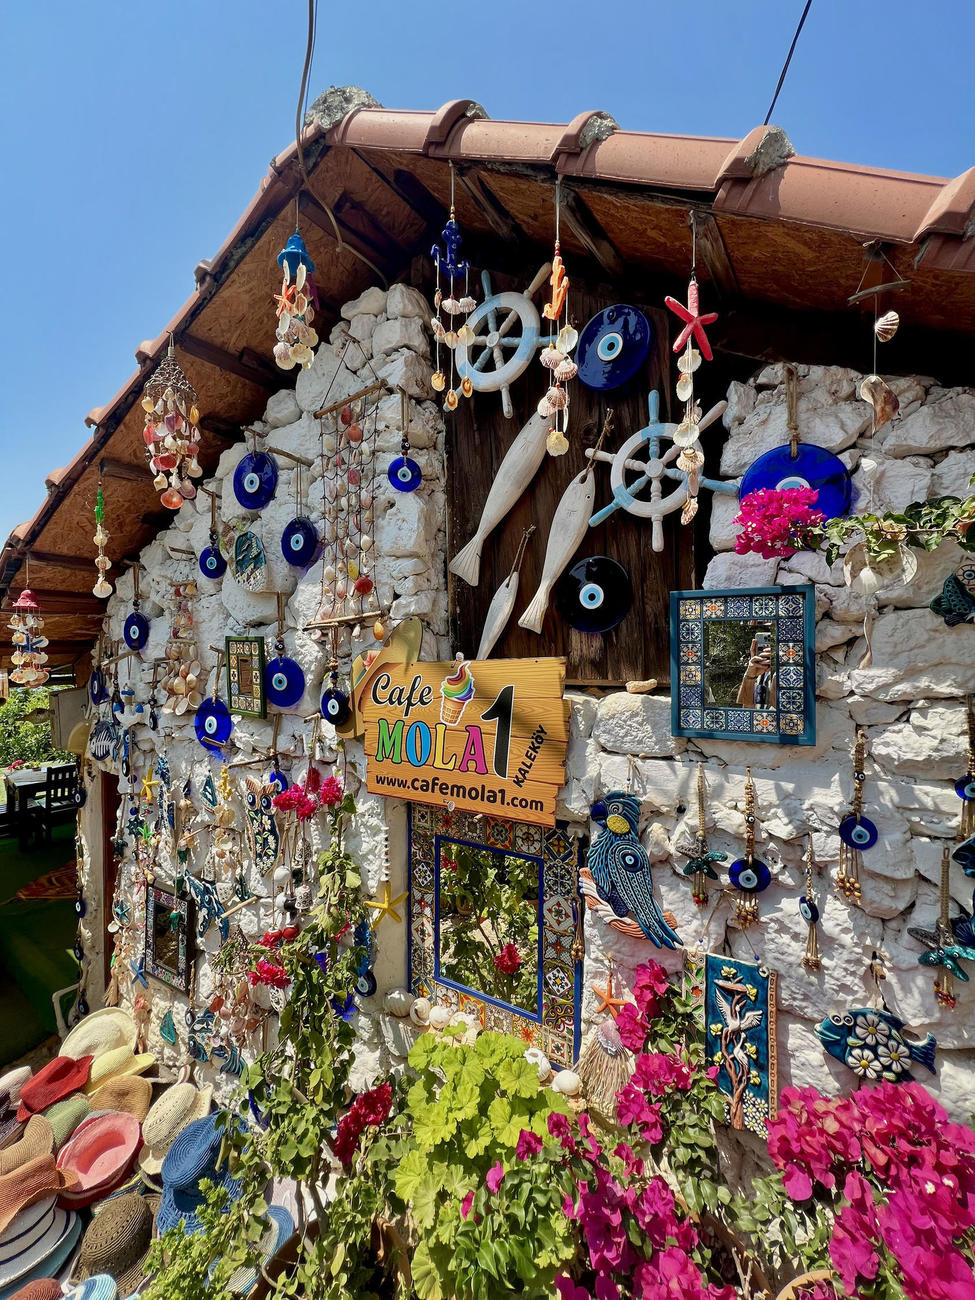 A tourist shop in Turkey adorned with ornaments and flowers